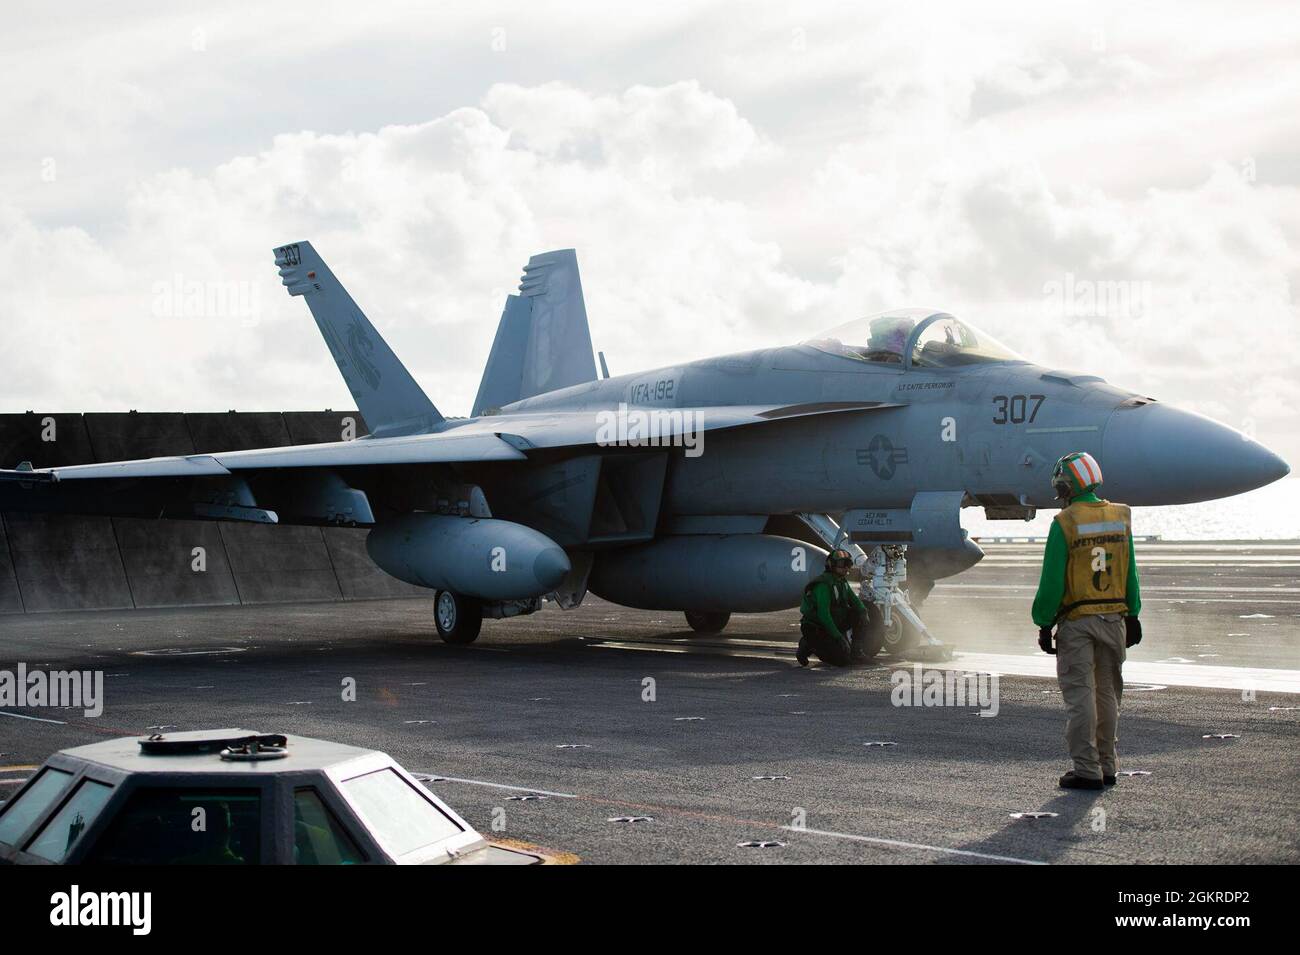 210620-N-IW069-1016 PACIFIC OCEAN (June 20, 2021) An F/A-18E Super Hornet, assigned to the “Golden Dragons” of Strike Fighter Squadron (VFA) 192, prepares to launch from the flight deck of Nimitz-class aircraft carrier USS Carl Vinson (CVN 70), June 20, 2021. Vinson is currently underway conducting routine maritime operations in U.S. 3rd Fleet. Stock Photo